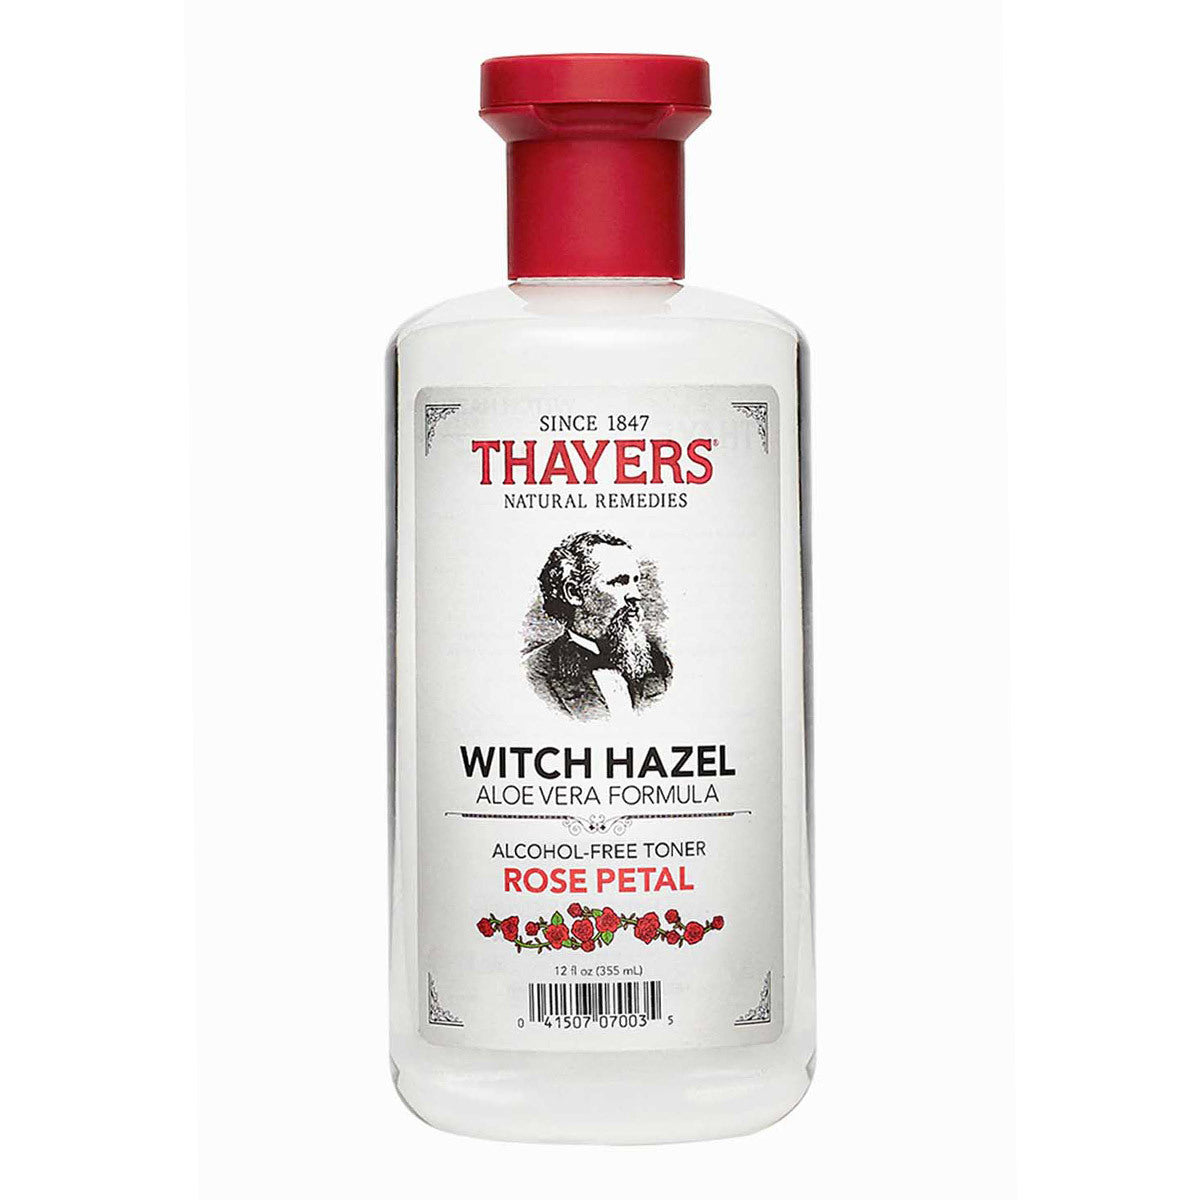 Primary image of Rose Petal Witch Hazel Alcohol Free